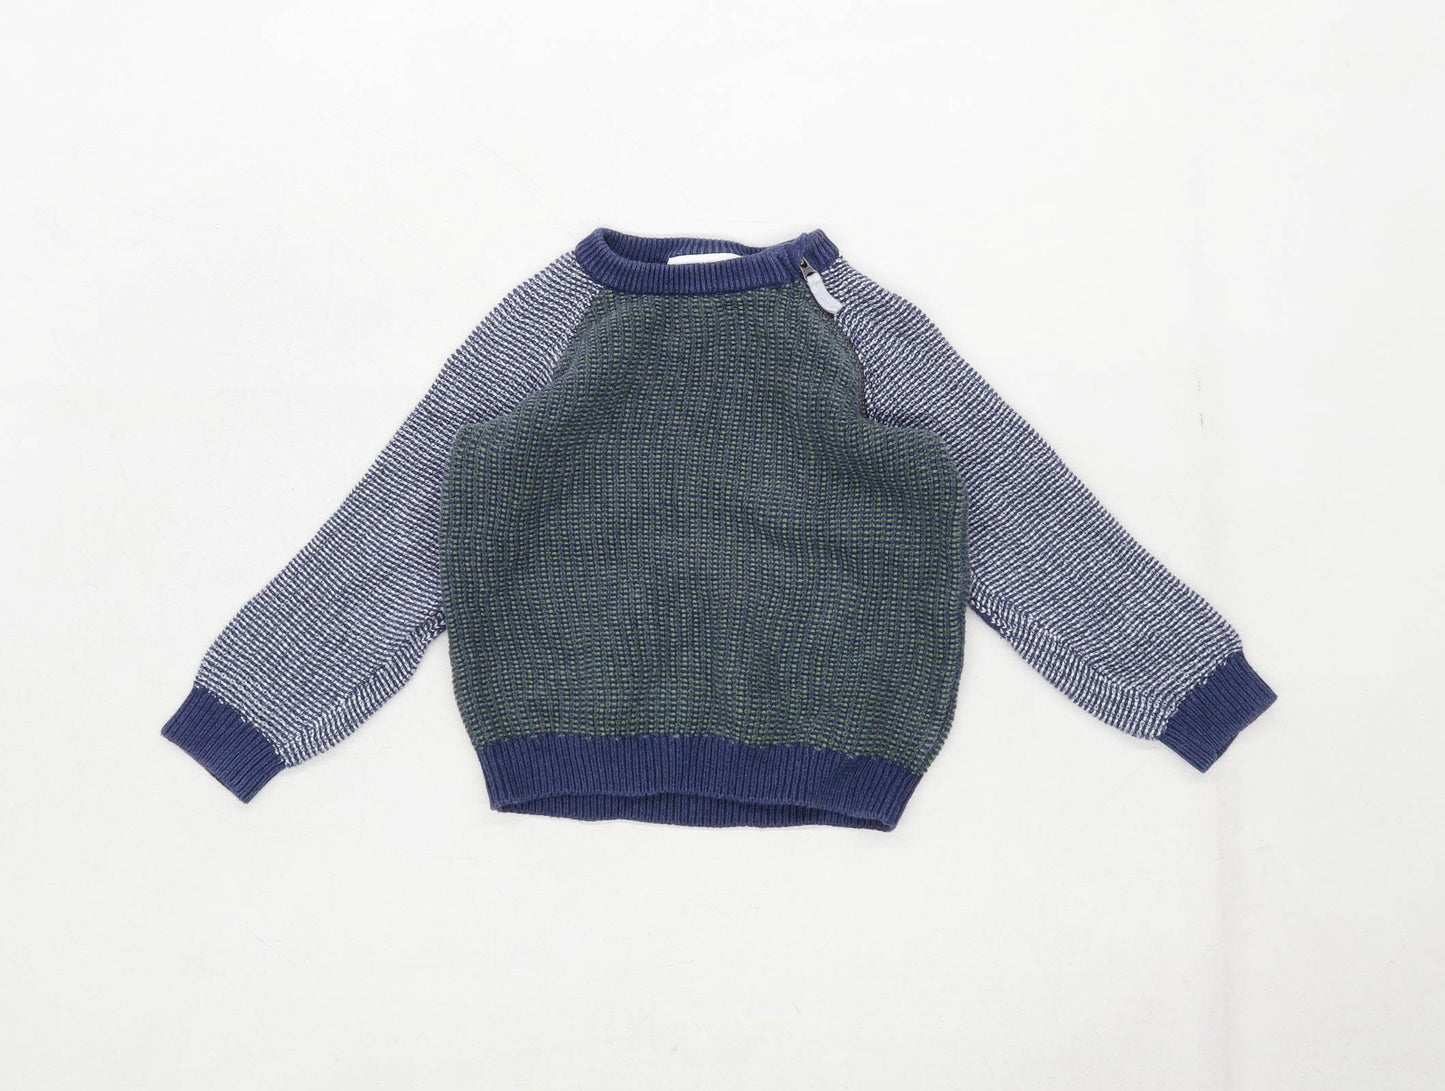 The Little White Company Boys Textured Green Jumper Age 2-3 Years